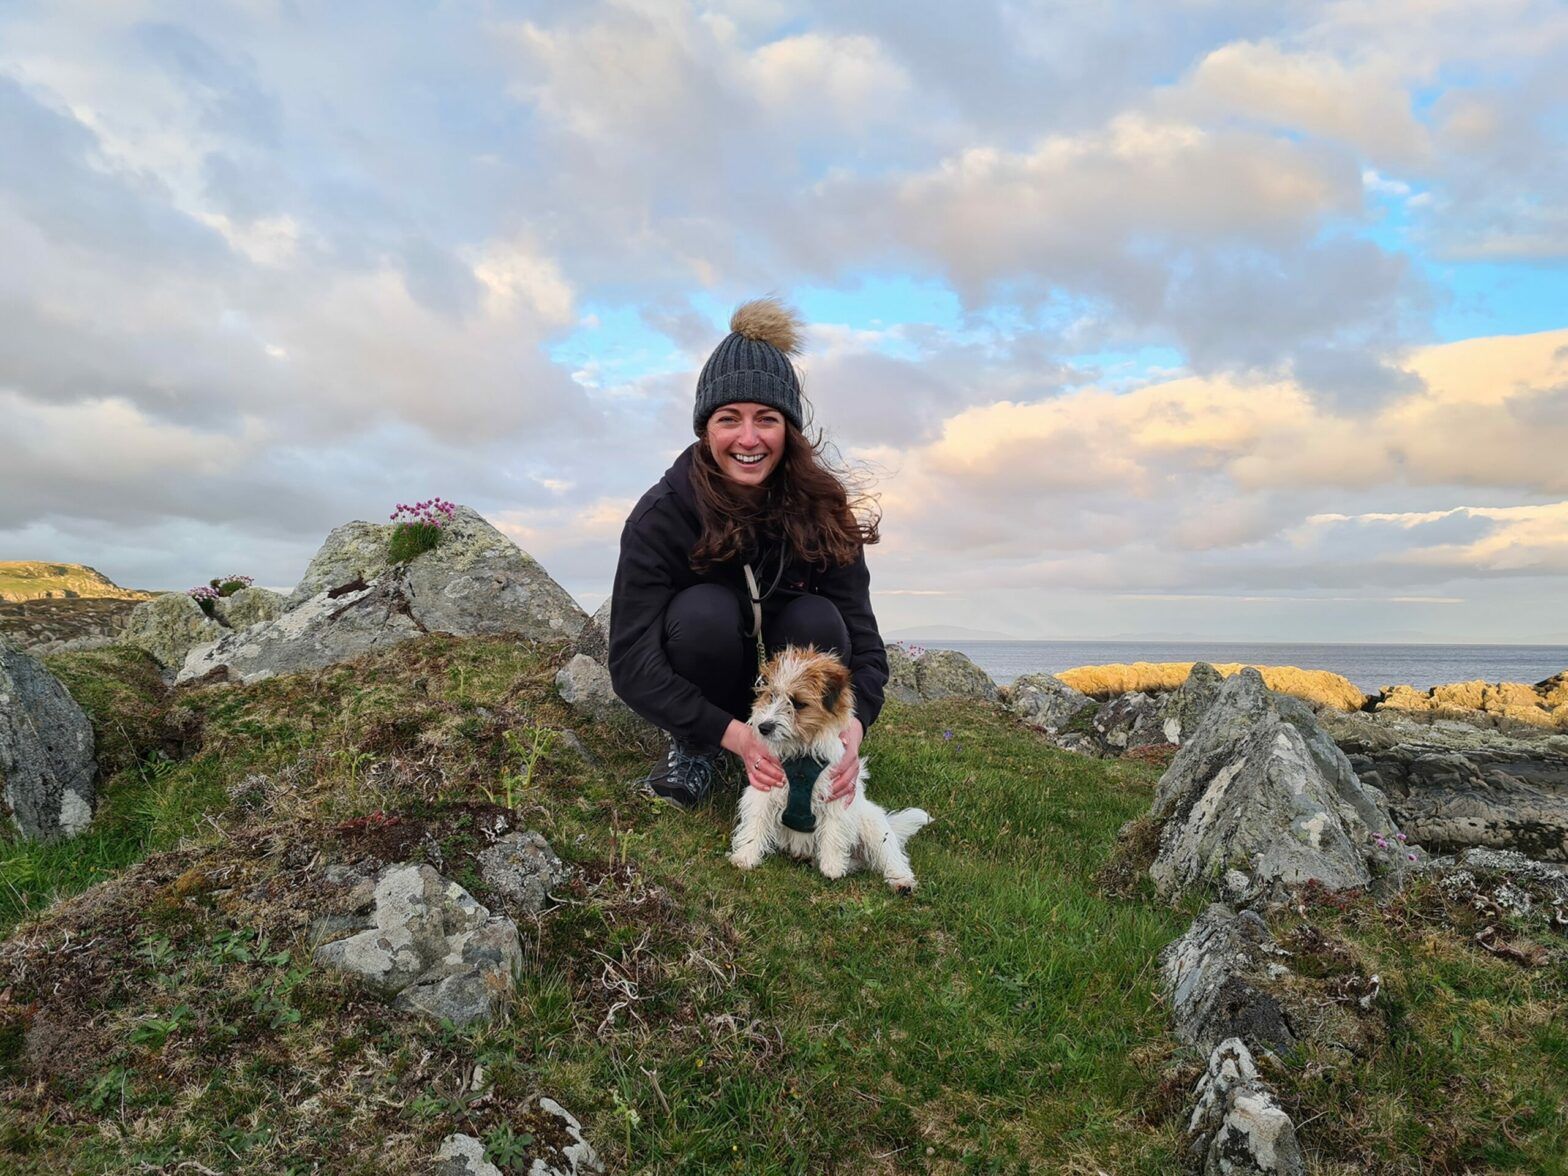 Staycation with Aegon’s Georgina Laird: Scottish beaches, solar panels and switching off